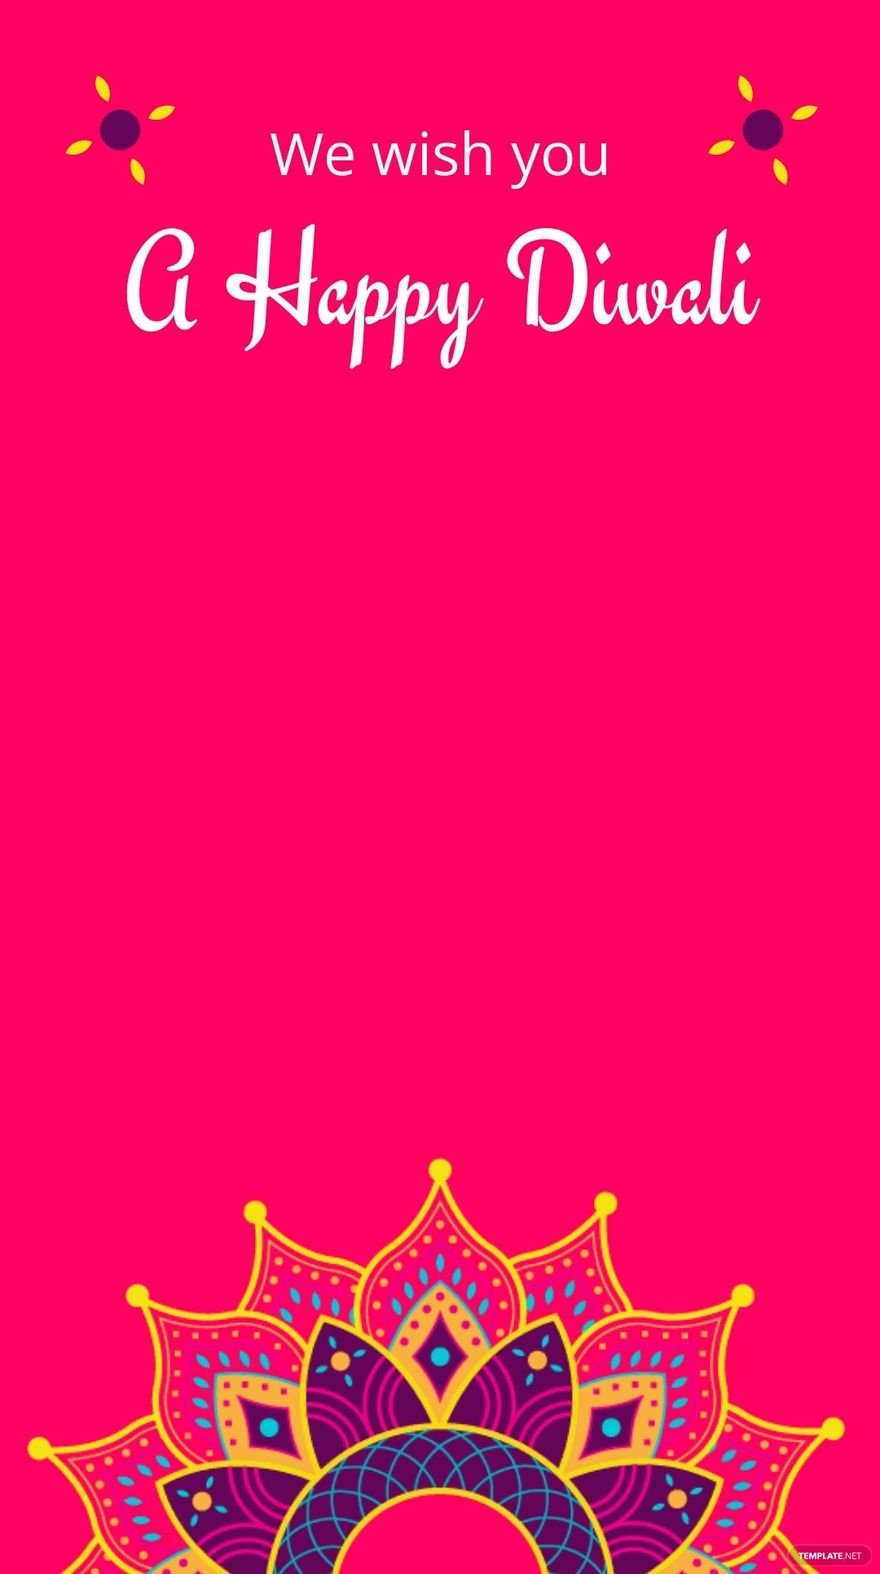 Free Colorful Diwali Wishes Snapchat Geofilter Template